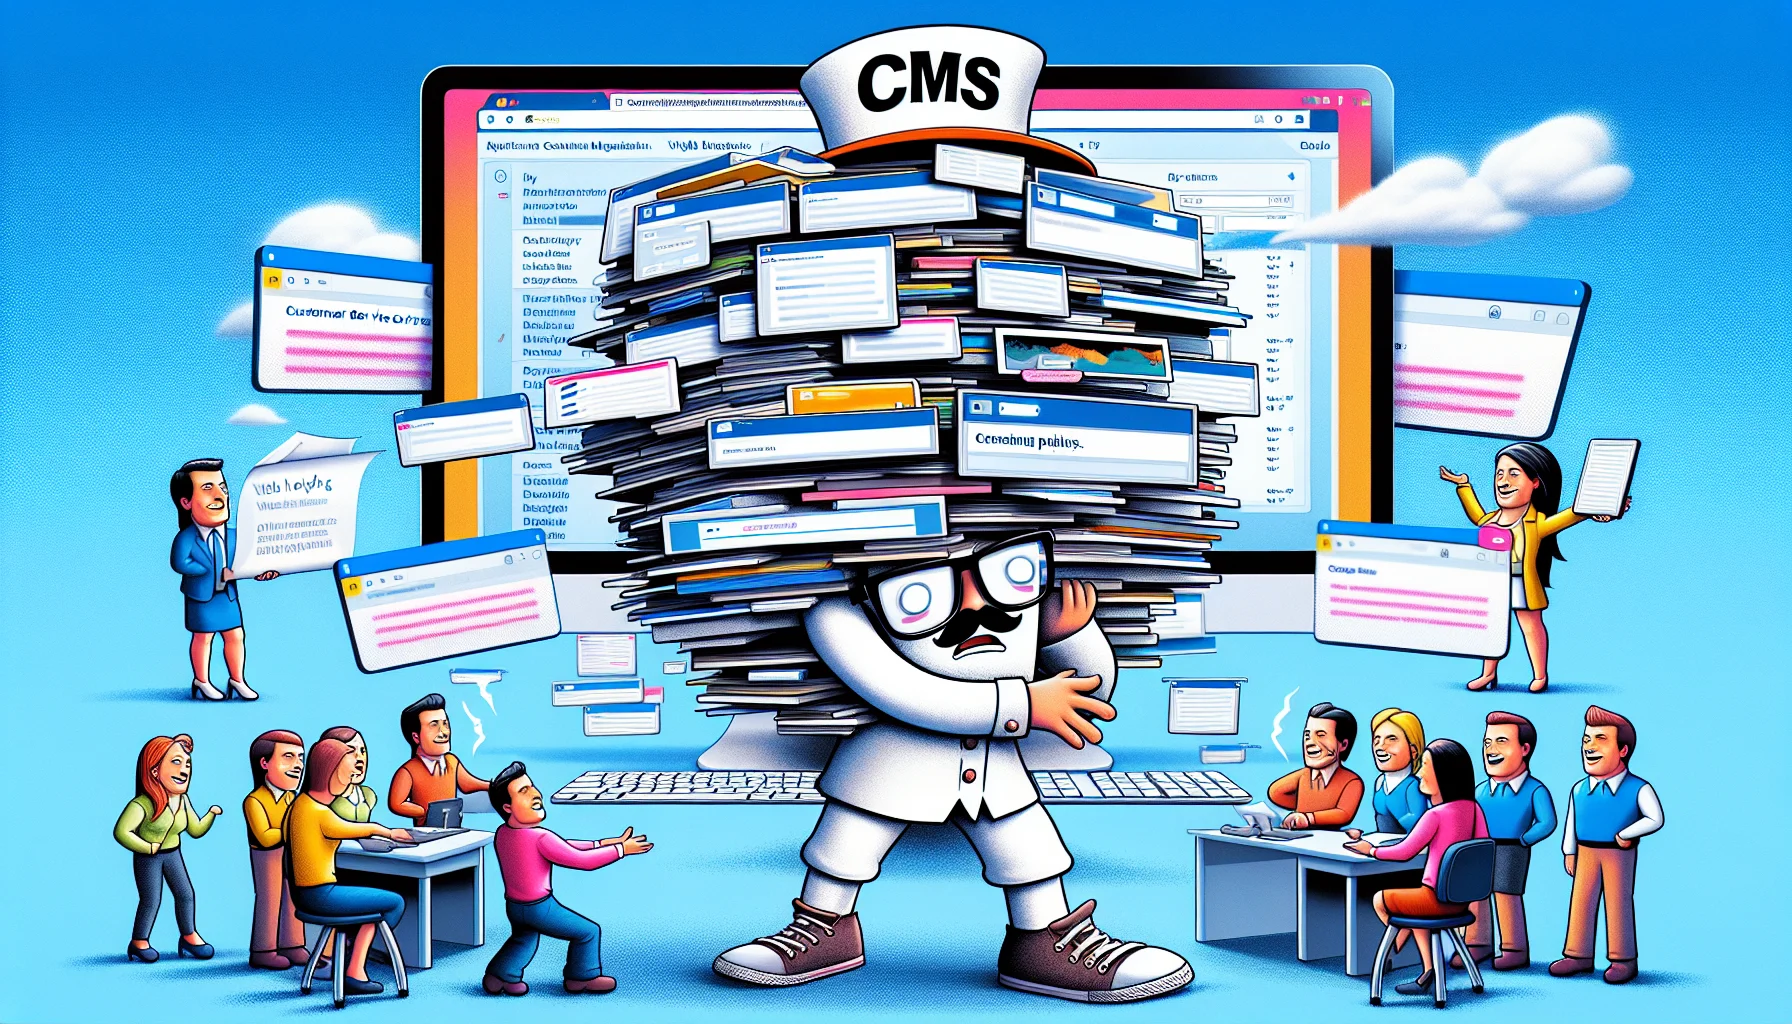 Generate an imaginative and realistic image of a humorous scenario involving a Content Management System. This comedic event takes place on a computer screen as represented within a colorful digital environment. Depict the CMS as an animated, anthropomorphized character being laden with a myriad of websites in its arms, struggling but trying to keep all of them from falling, embodying the 'load' of hosting multiple sites. The CMS character wears glasses and a hat that says 'CMS'. Nearby, customer service characters, represented by various avatars of diverse descents and genders, happily offer 'web hosting plans' to it, with menus, adding to the fun and complexity.